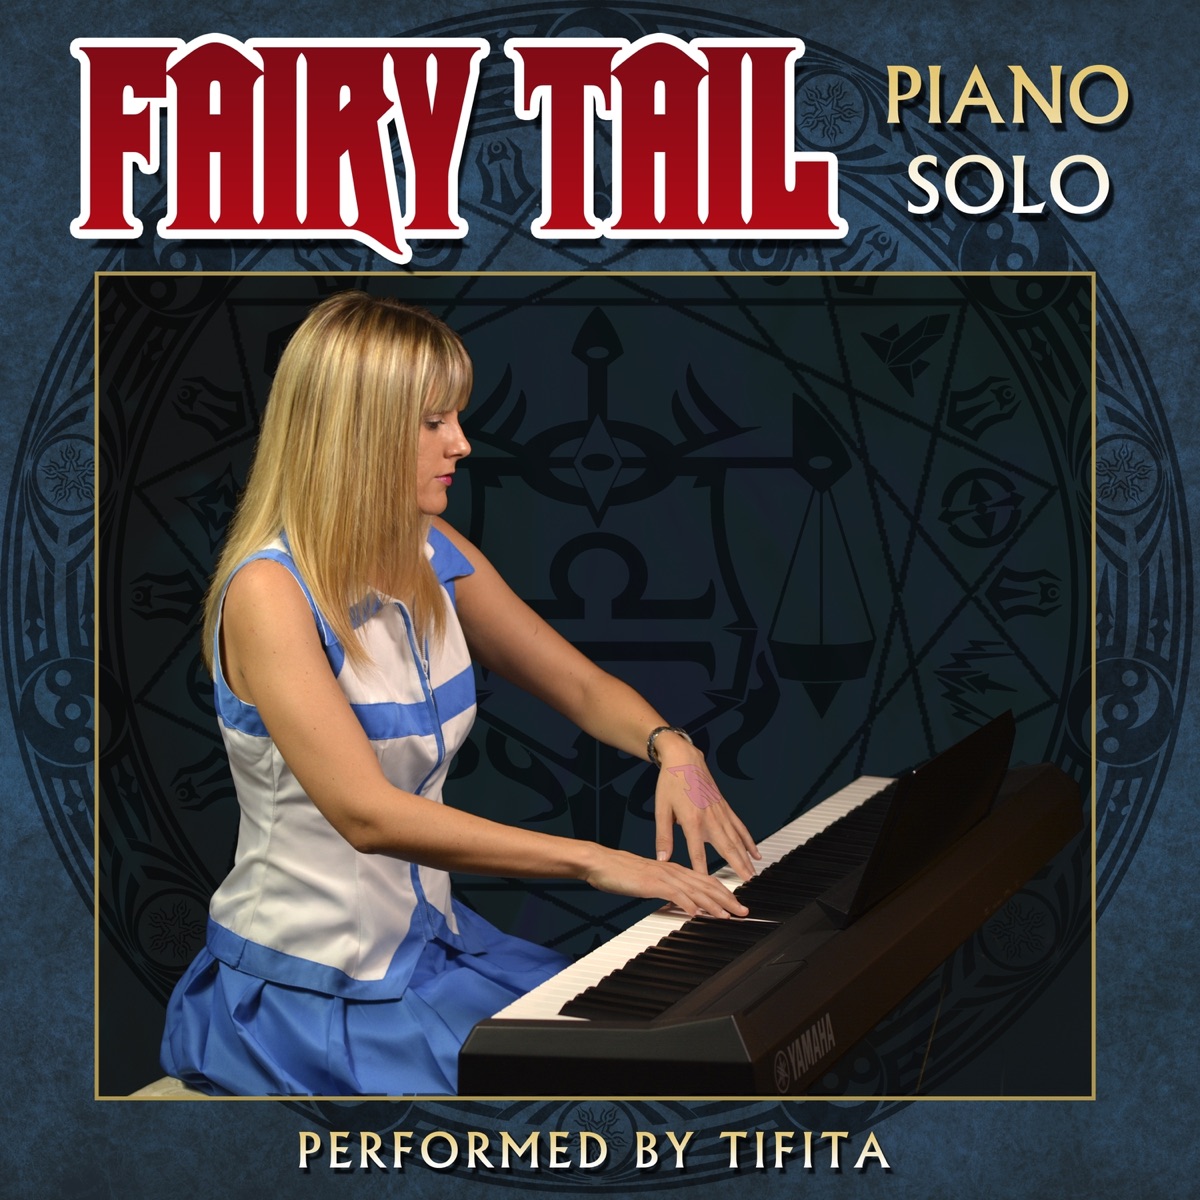 Your Lie in April (Piano Solo) - EP by Tifita on Apple Music